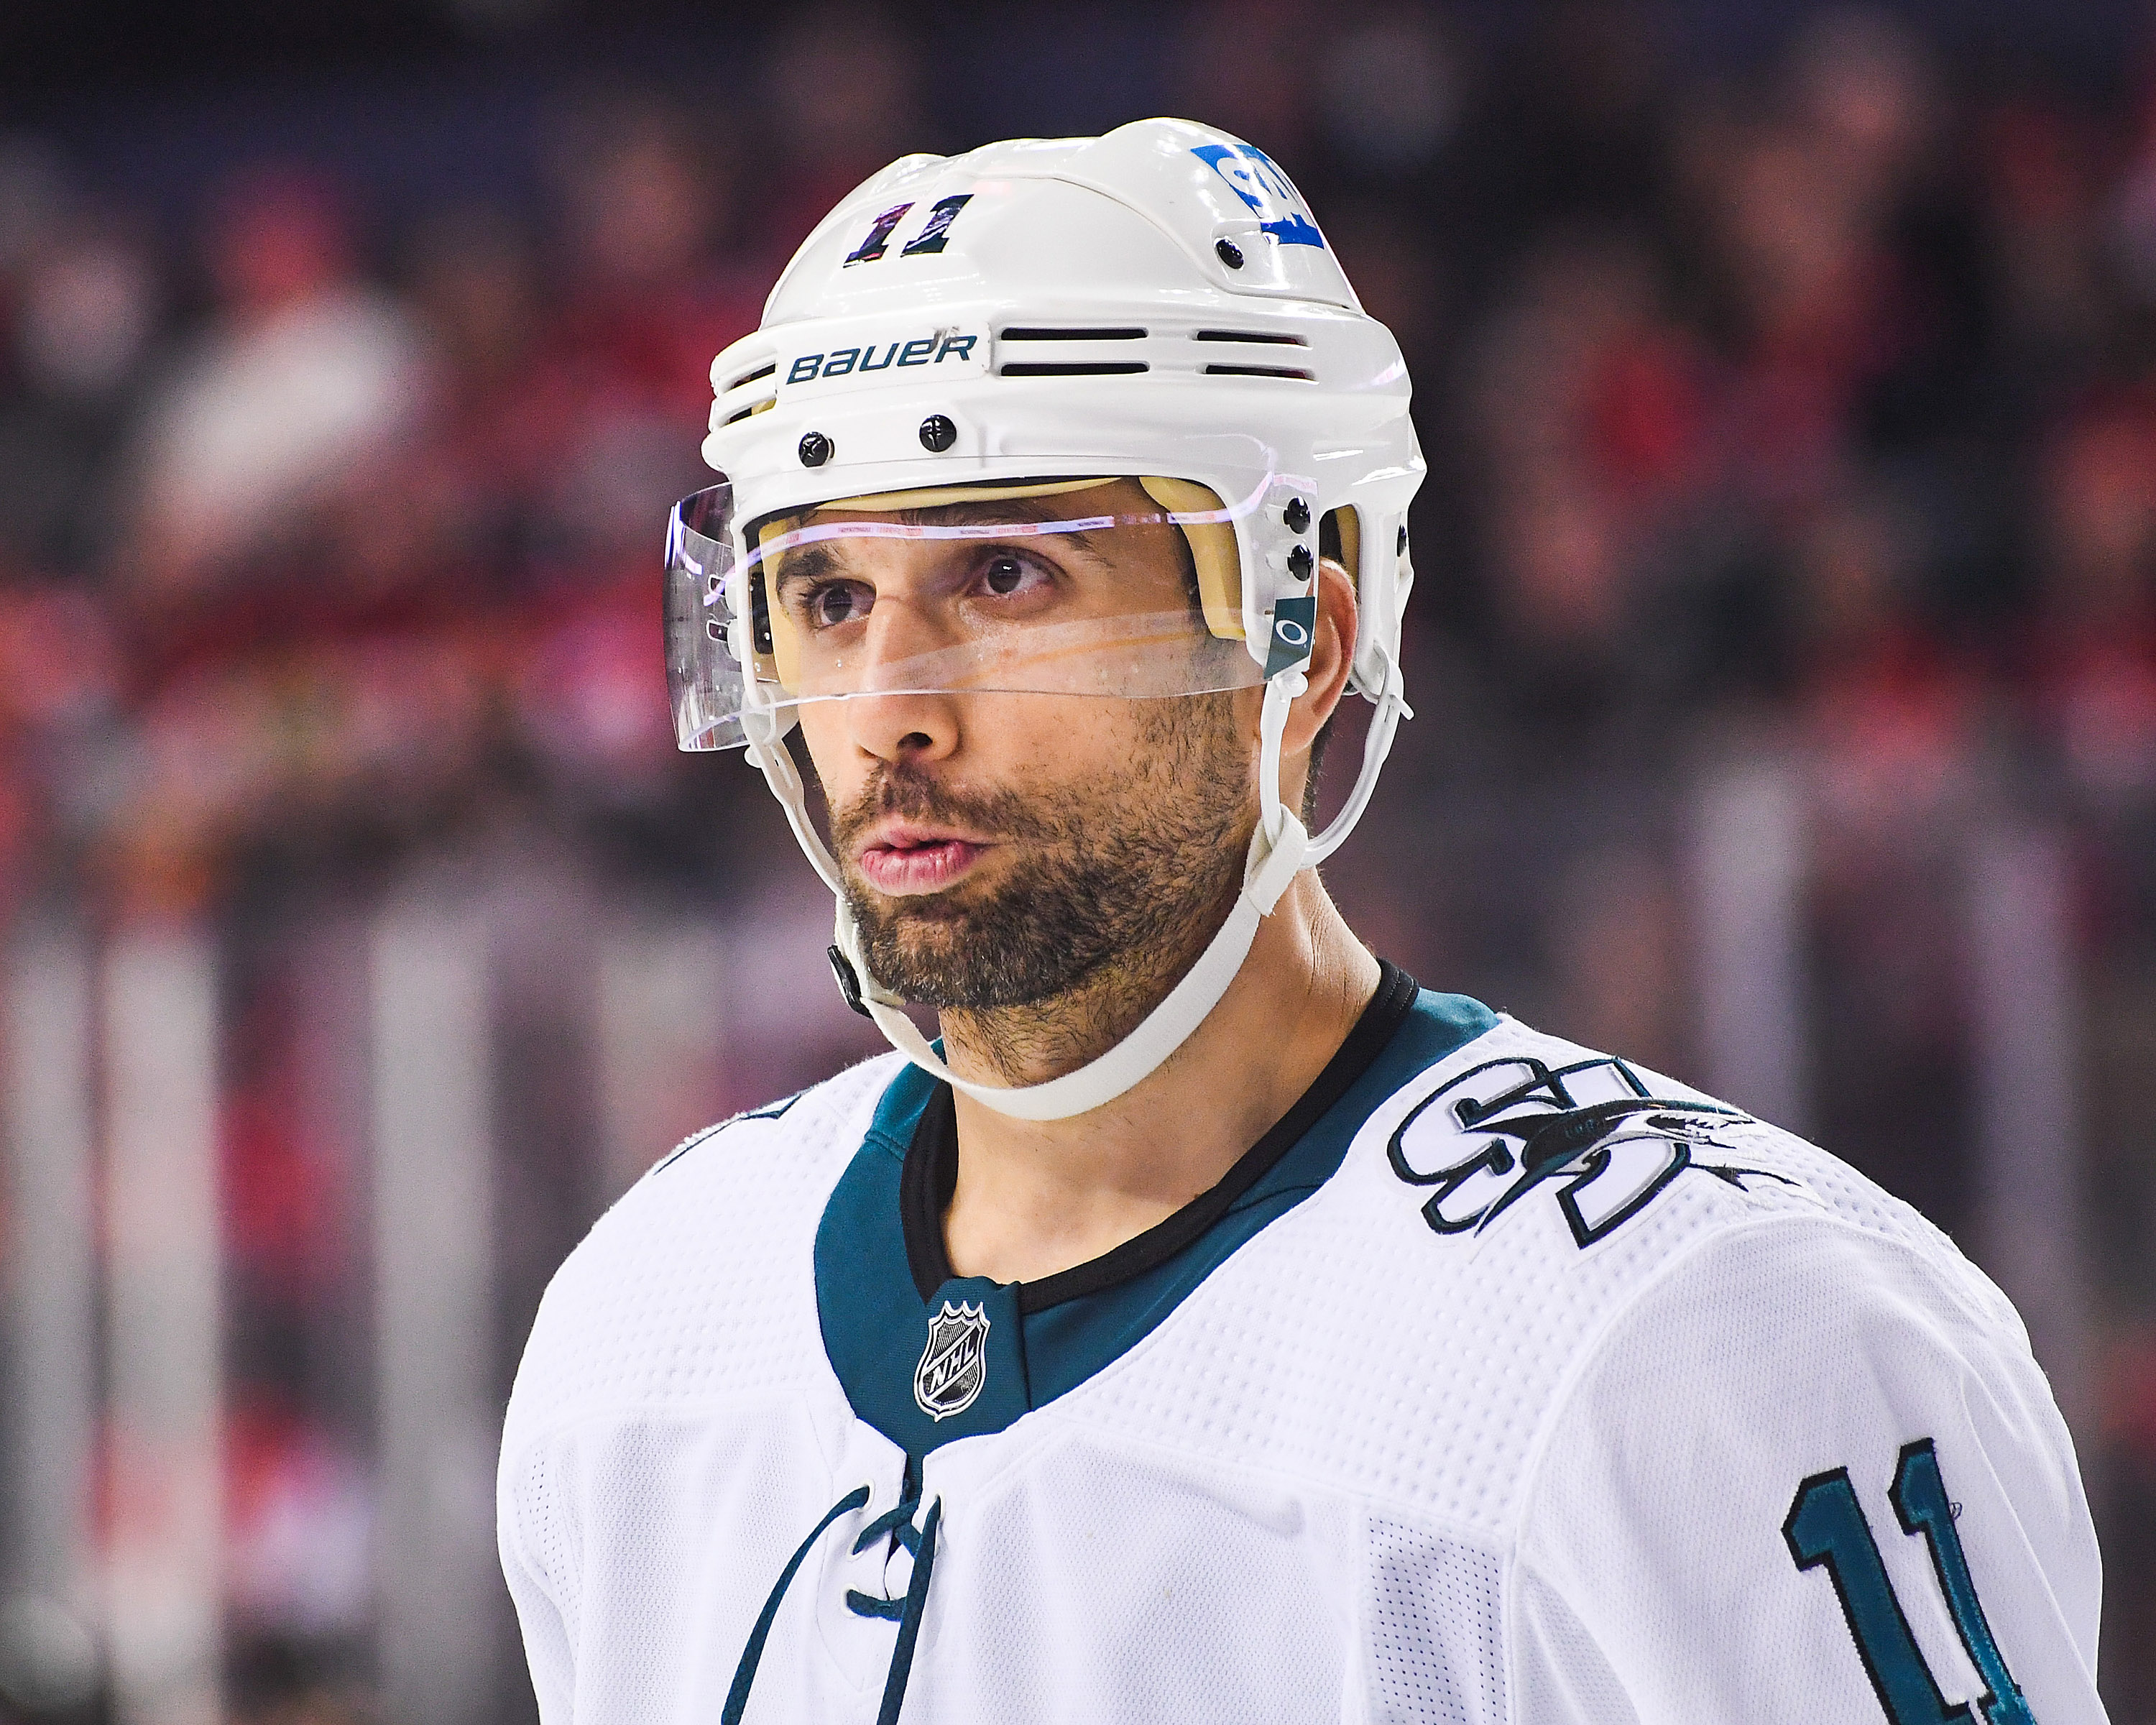 Andrew Cogliano #11 of the San Jose Sharks in action against the Calgary Flames during an NHL game at Scotiabank Saddledome on November 9, 2021 in Calgary, Alberta, Canada.